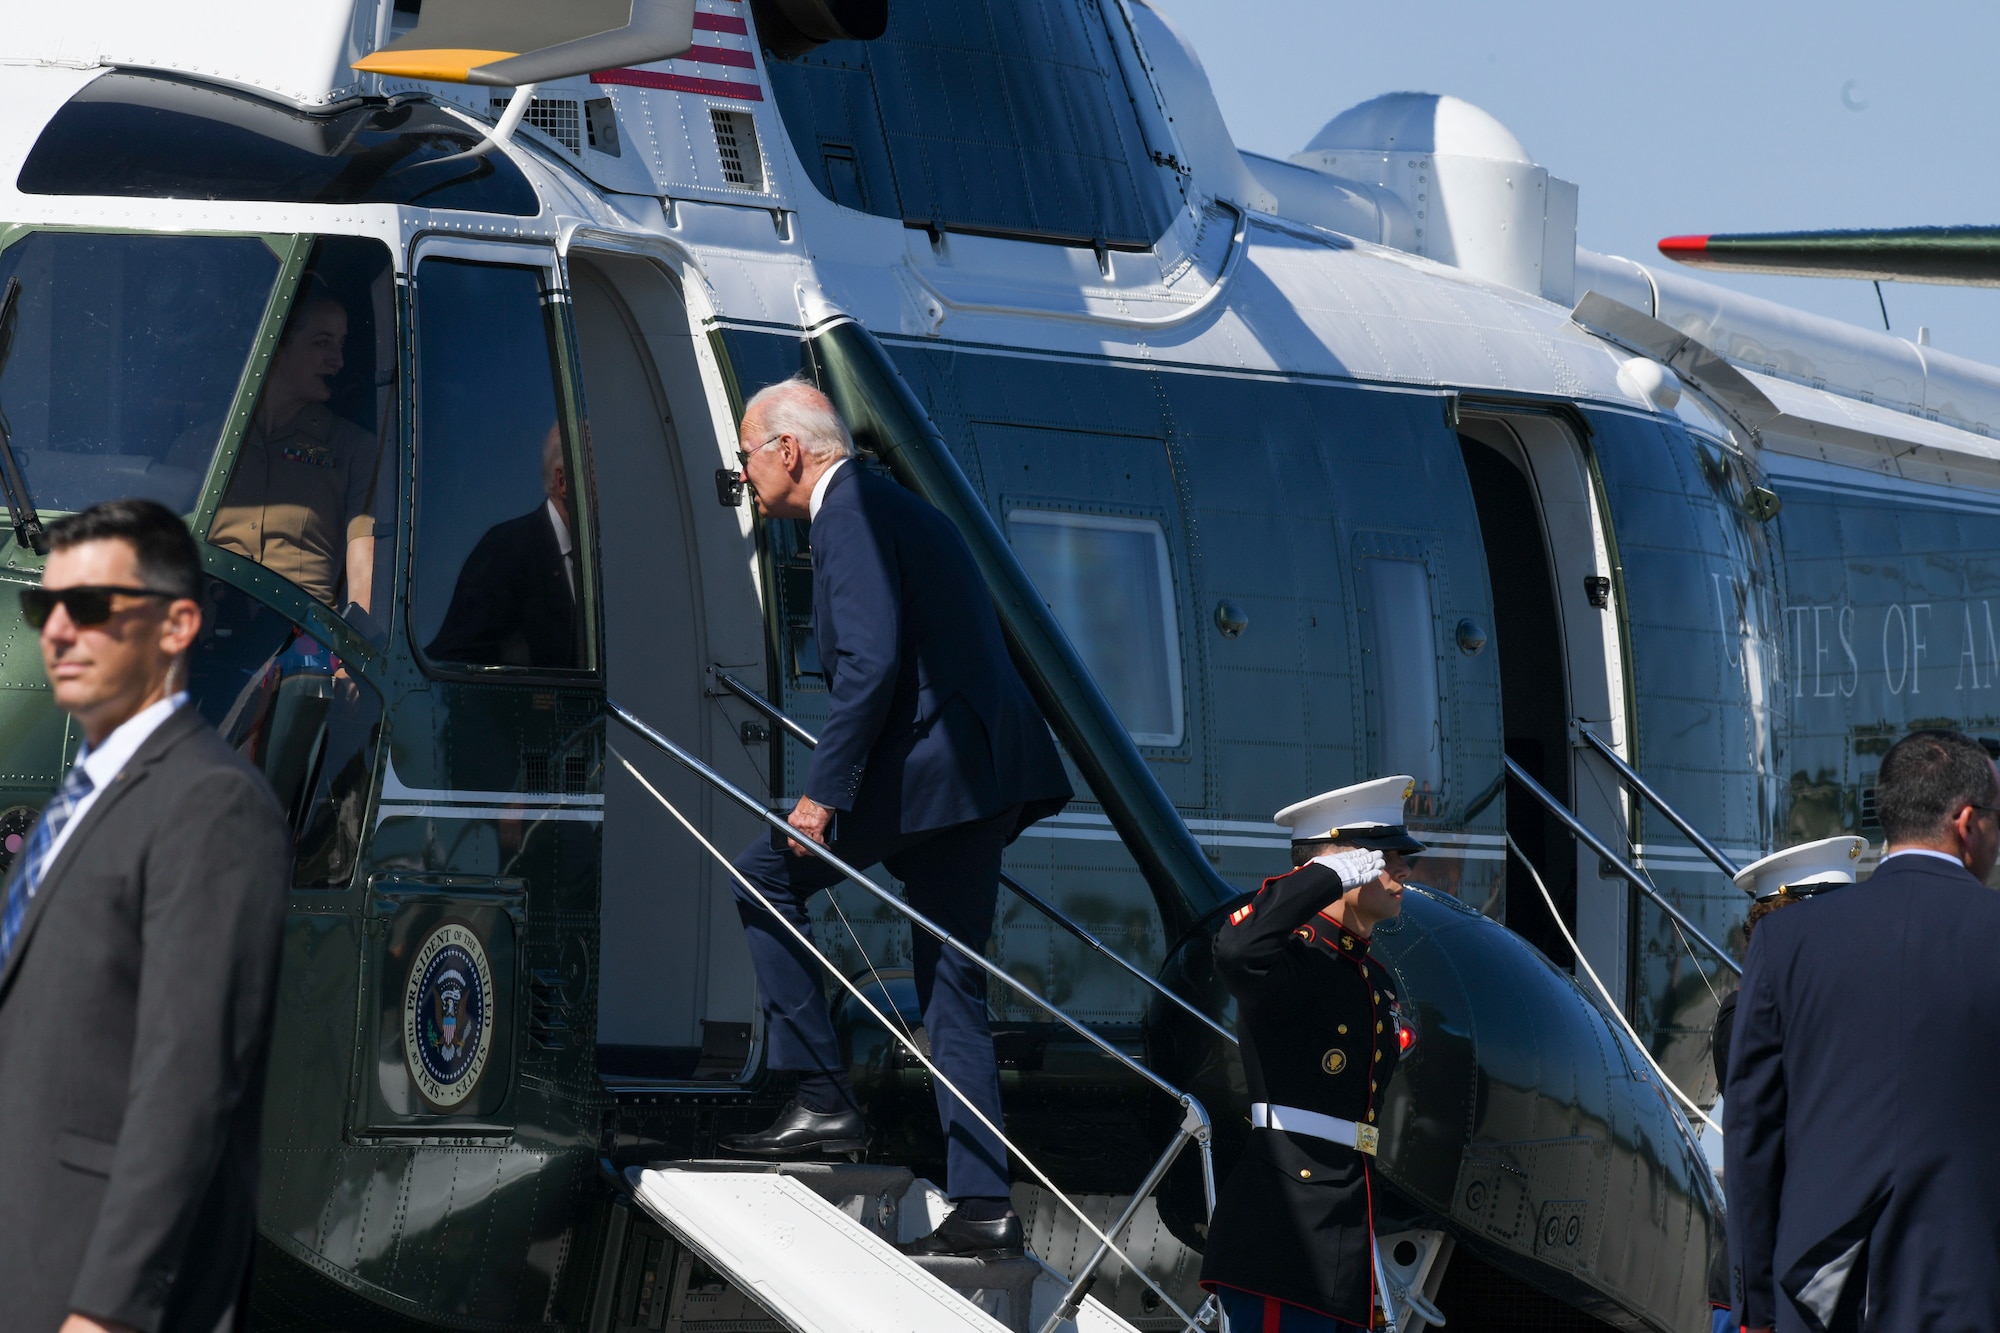 U.S. President Joe Biden boards Marine One at Dover Air Force Base, Delaware, while enroute to Wilmington, Del., Sept. 9, 2022.